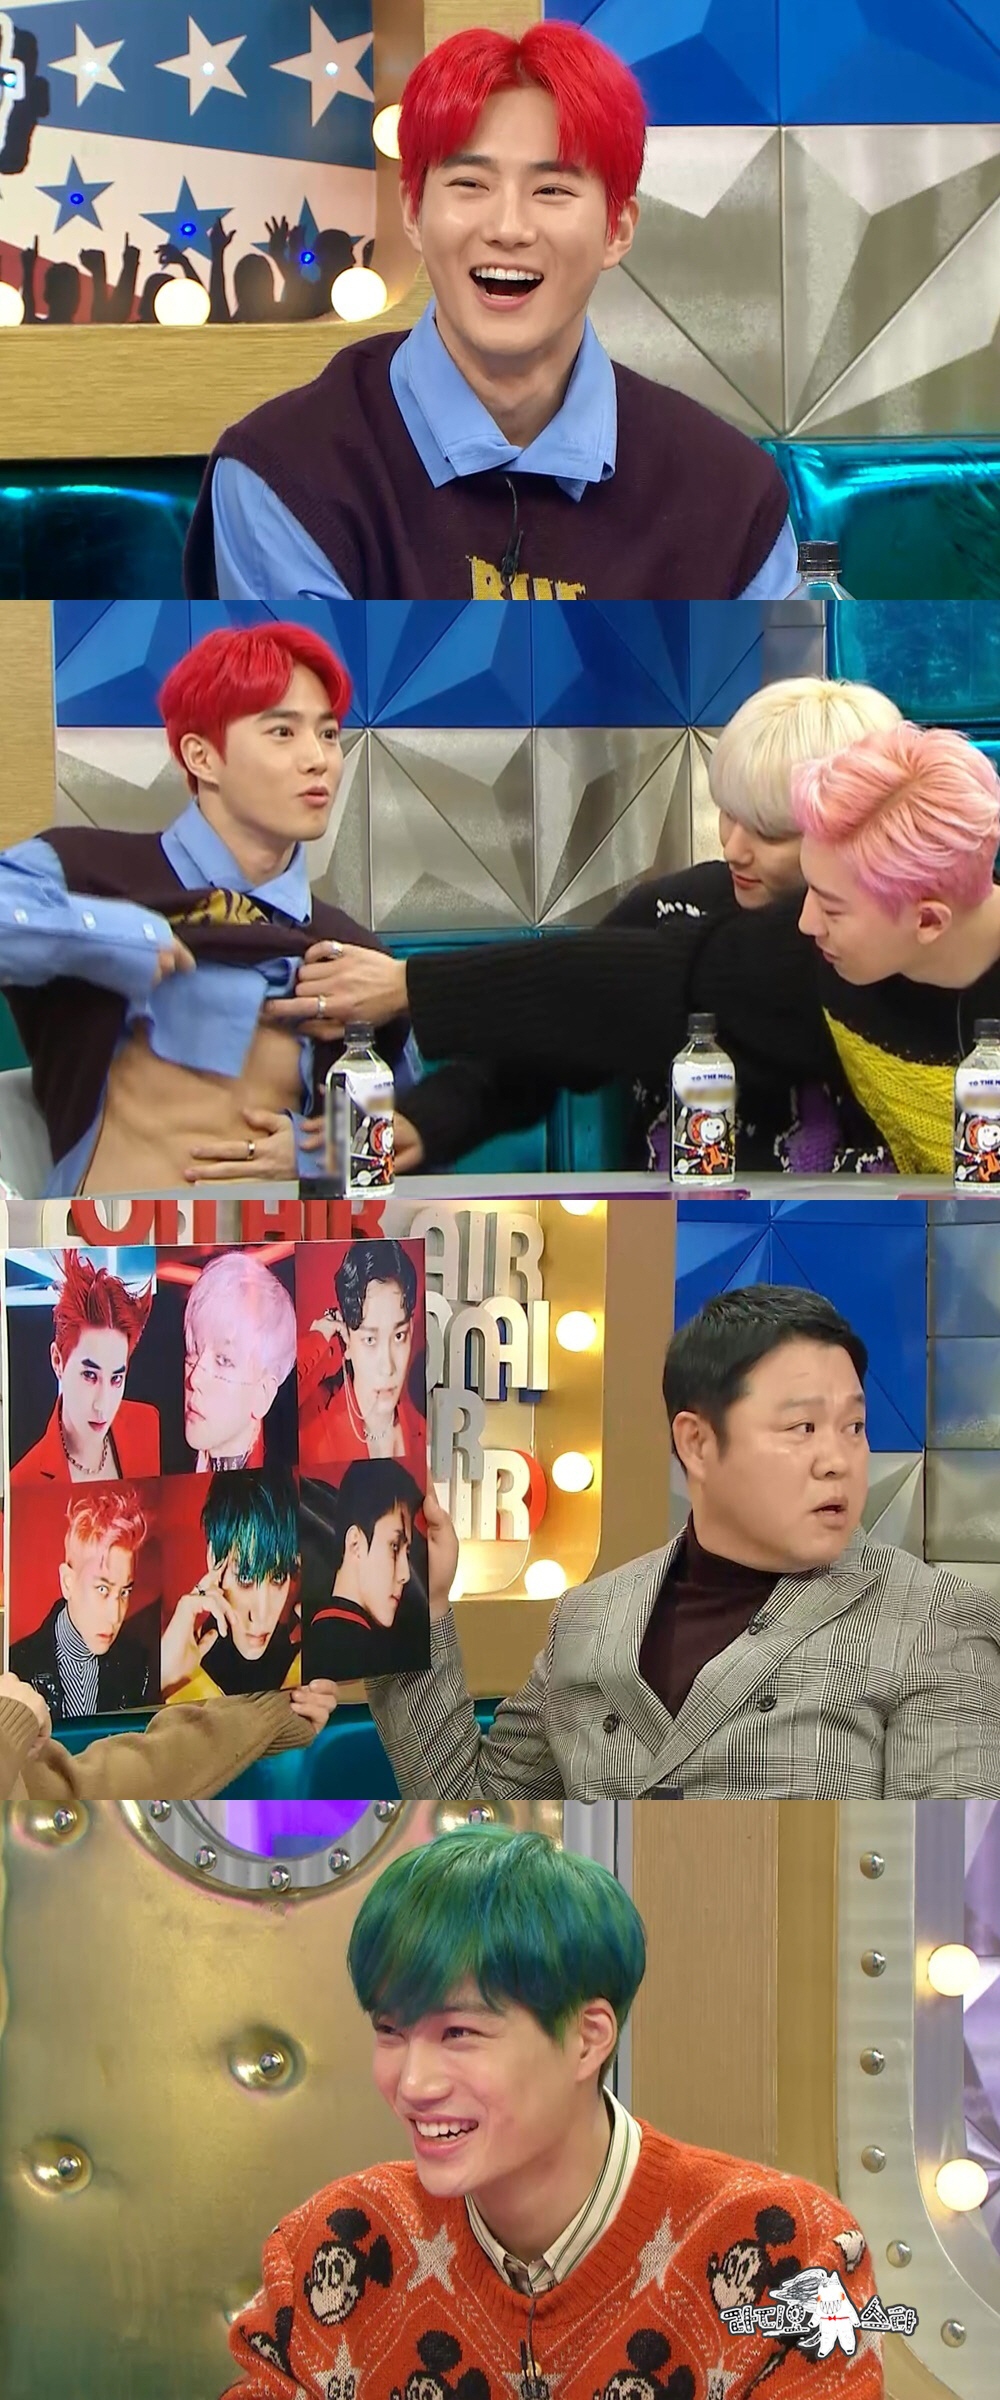 EXO Suho appears on Radio Star, revealing a lavish sense of entertainment from the release of abdominal muscles to the release of Black History.In addition, Kai will also be a laughing cat and will be in a fierce battle with EXOs entertainment department.MBC Radio Star, a high-quality talk show scheduled to air at 11:05 p.m. today (4th), will feature EXO Radio Star featuring EXO Suho, Baekhyun, Chanyeol, Kai, Sehun and Chen.EXO leader Suho releases a sense of entertainment: first he has been open to the public with abdominal muscles, robbing everyone of their attention.In addition, Suho is interested in revealing the black history that is surging, but it is the back door that the members turned away from it and made a laugh.Suho expresses his regrets to Gim Gu-ra, what he still had in his mind after receiving the diss of Gim Gu-ra in the past.Gim Gu-ra, who heard this, is said to have been embarrassed and praised for It is an entertainment trend!Suho tells me that he is in the process of breaking the Imjingak when he sees only the idol juniors. In particular, he mentions the legendary midwinter jacket in Imjingak.The video of the incident will be released and will add to the fun.In the meantime, Kai claims to be a laugher. He is in charge of laughter among his best friends such as BTS Jimin and Shiny Taemin.Everyone is responding that they can not believe it, and it stimulates curiosity about why Kai showed confidence in laughter.Kai also draws attention to the members who are concerned about mentality, saying that the person seems to be affected by the evil.I am curious about who is the main character who received the worry of the members.EXO Suho and Kais contest for entertainment can be confirmed through Radio Star, which is broadcasted at 11:05 pm today (4th).